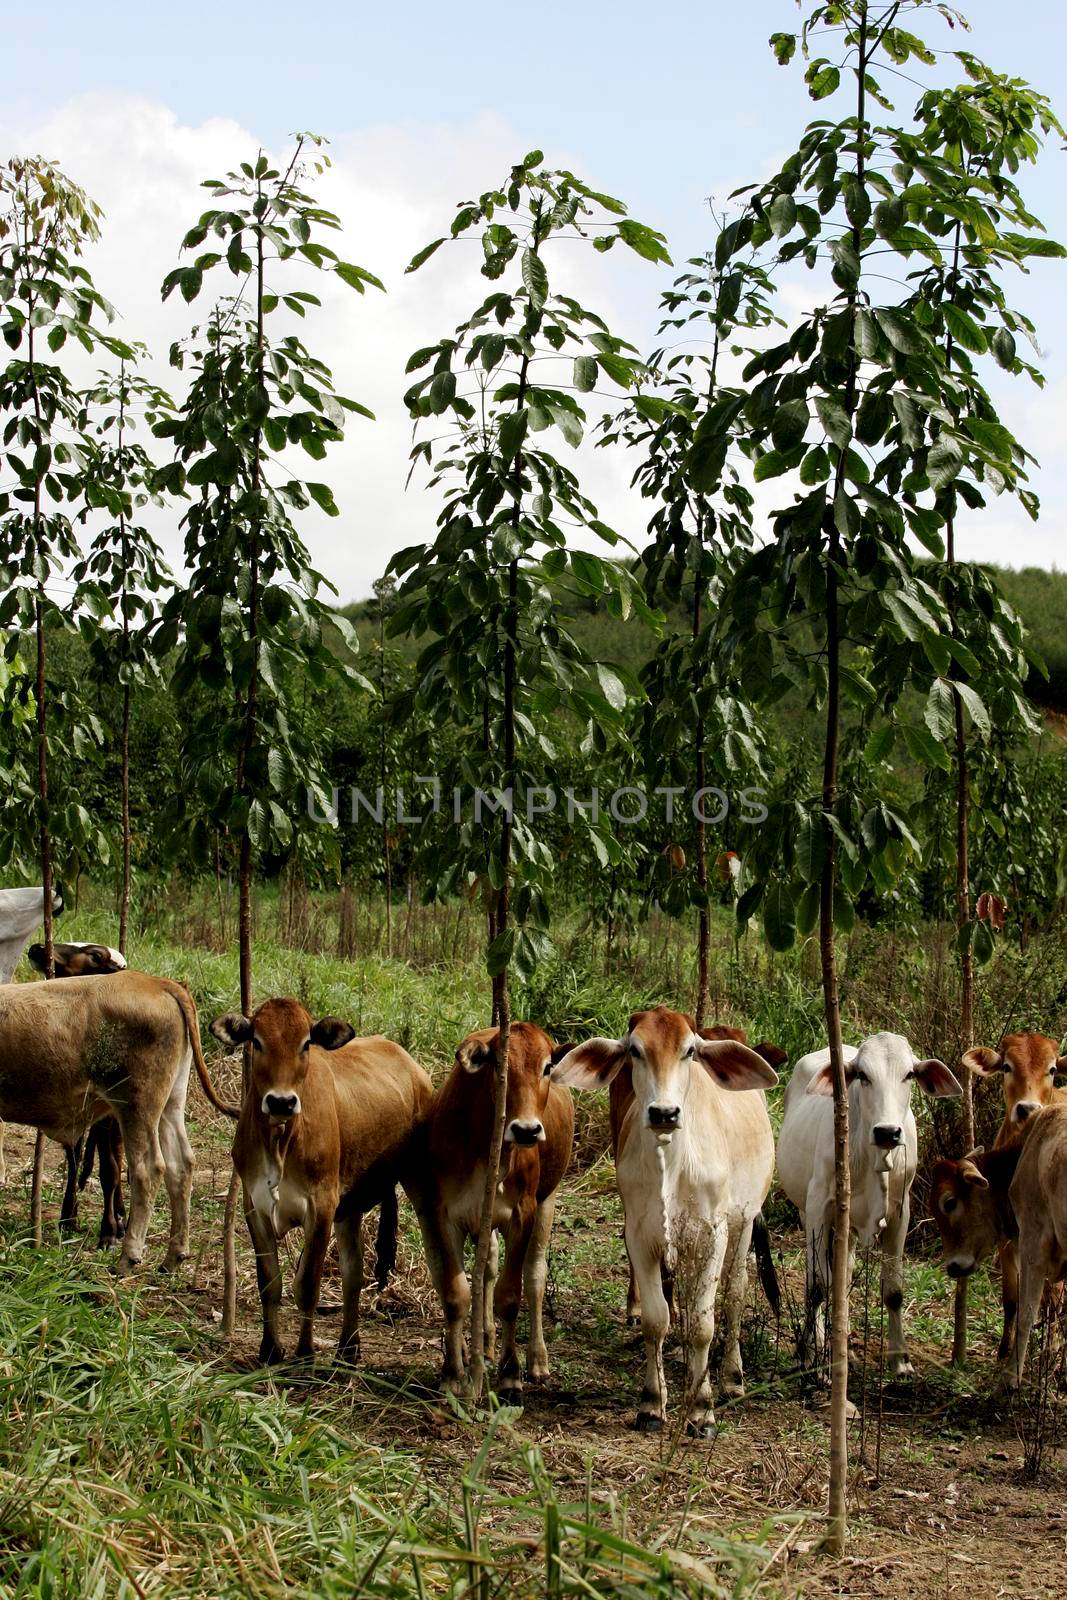 eunapolis, bahia / brazil - june 8, 2009: cattle ranching on the farm in the city of Eunapolis, in southern Bahia.


